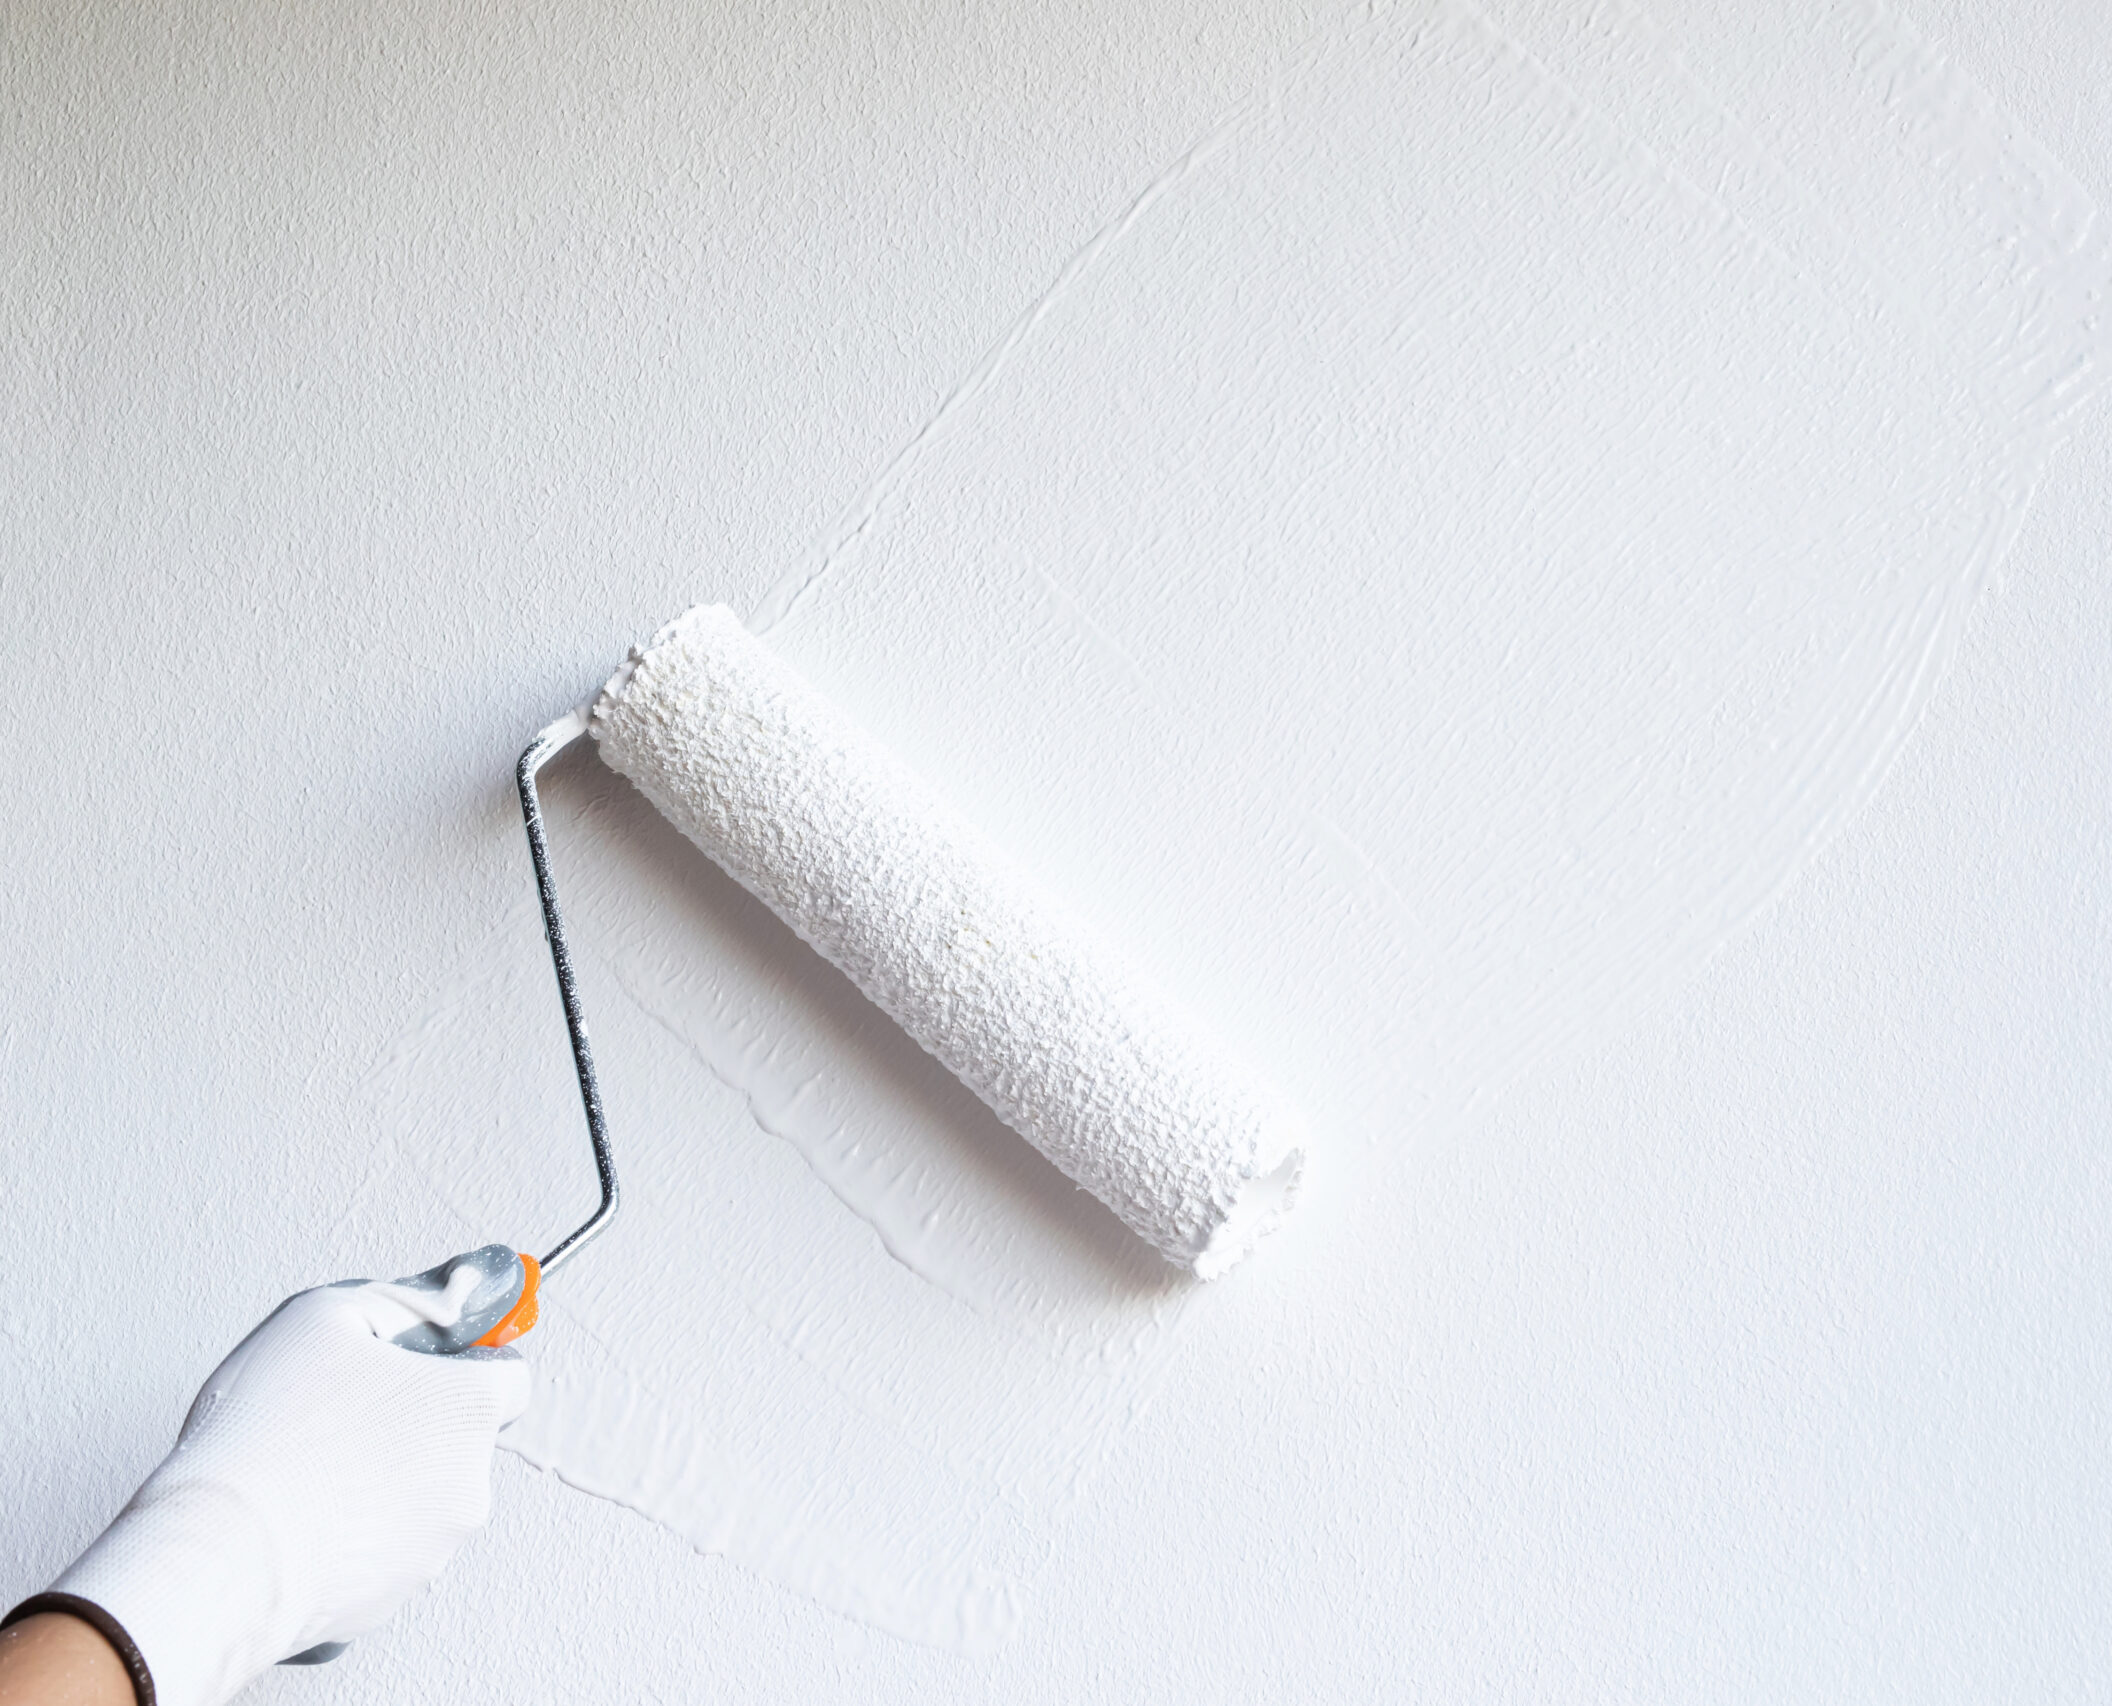 How To Choose The Right White Paint For Your Walls - VITA Daily